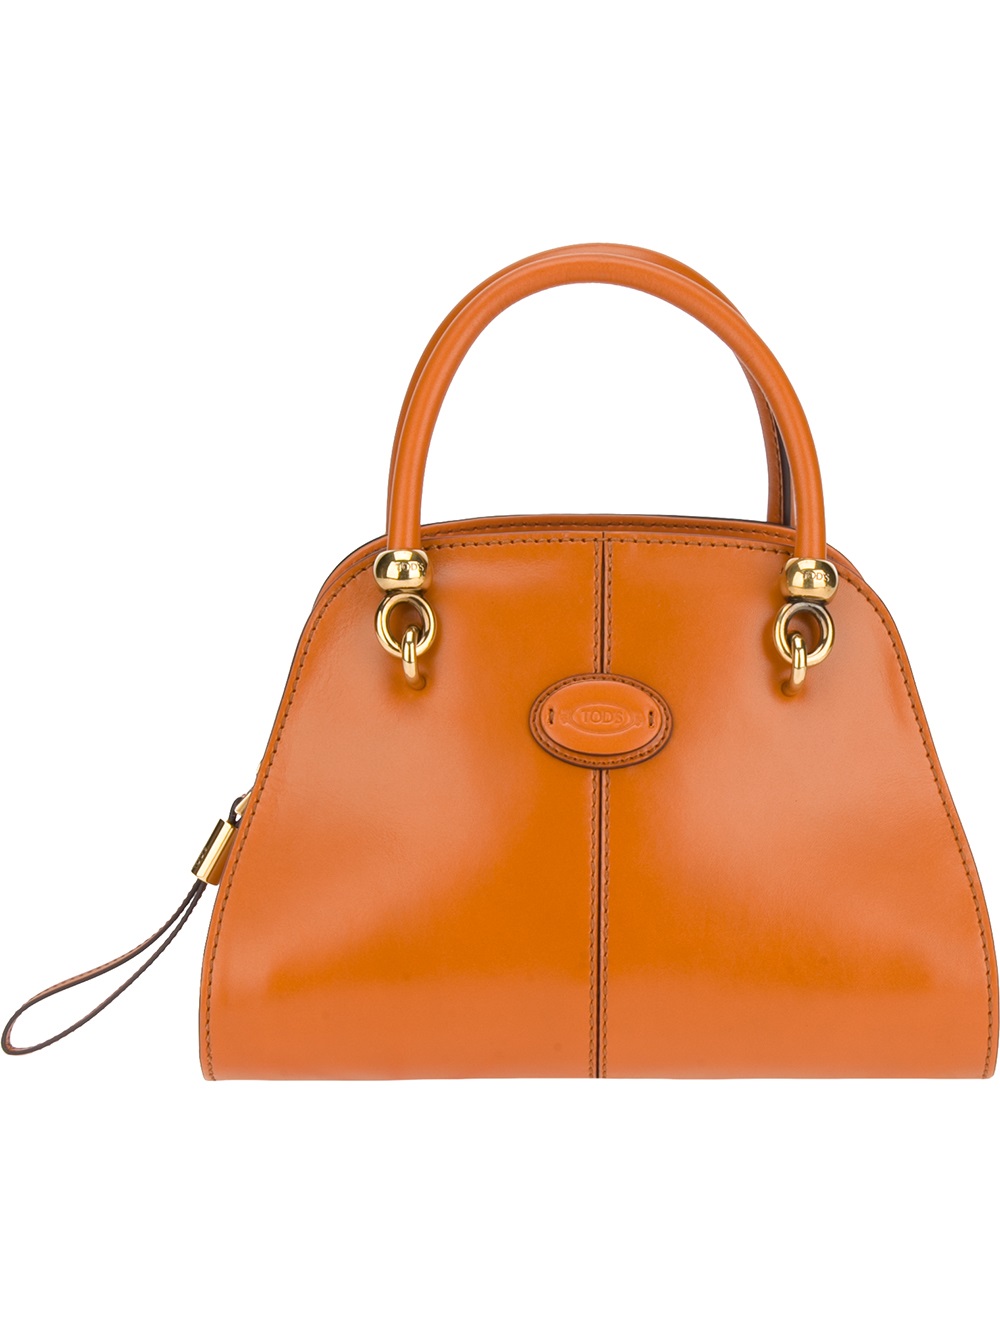 Tod's Classic Bowling Bag in Brown - Lyst